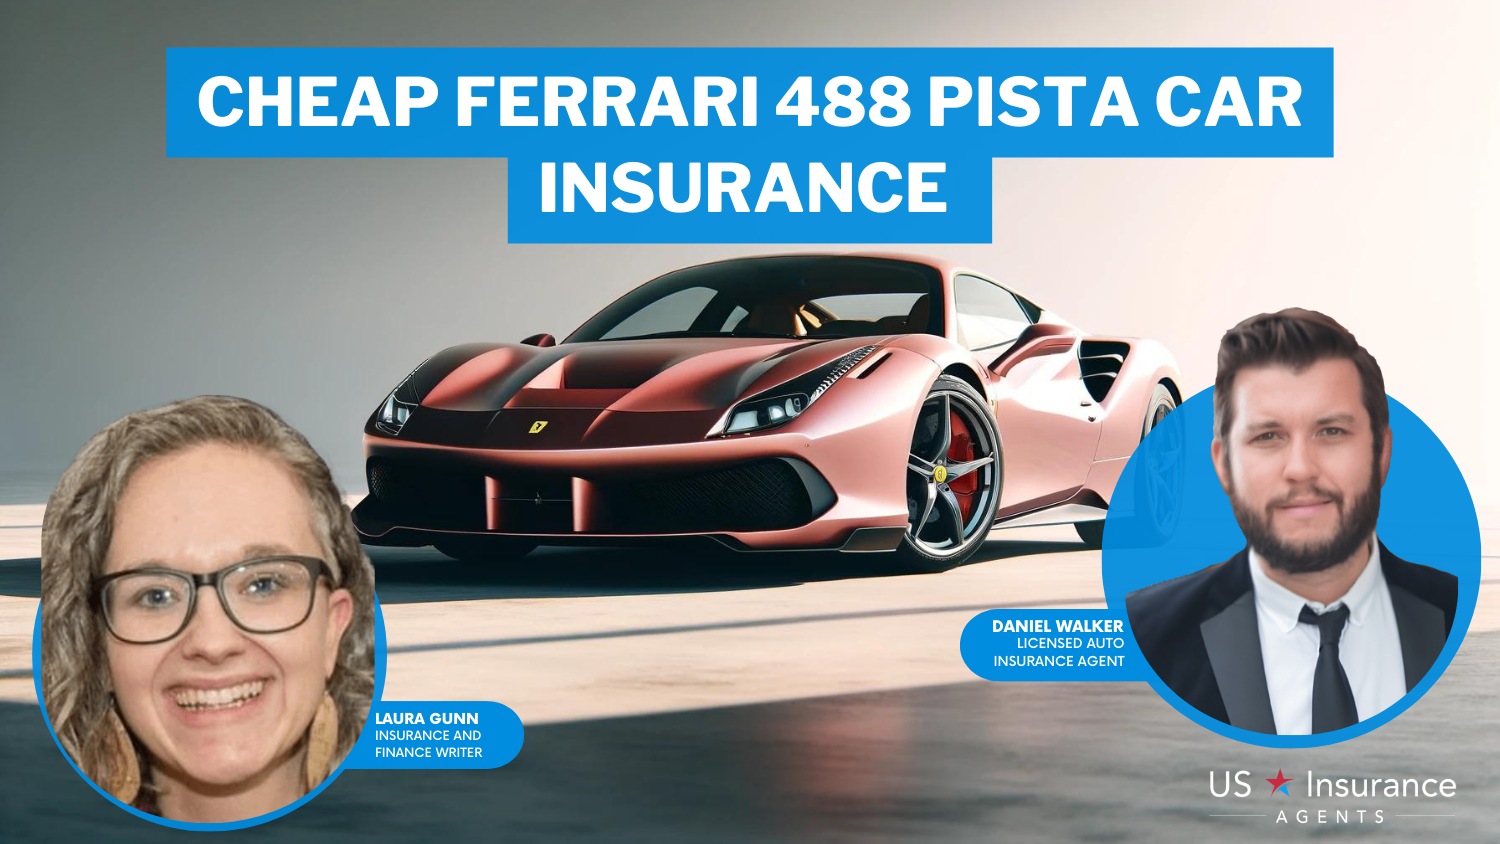 Cheap Ferrari 488 Pista Car Insurance: AAA, American Family, and Auto-Owners